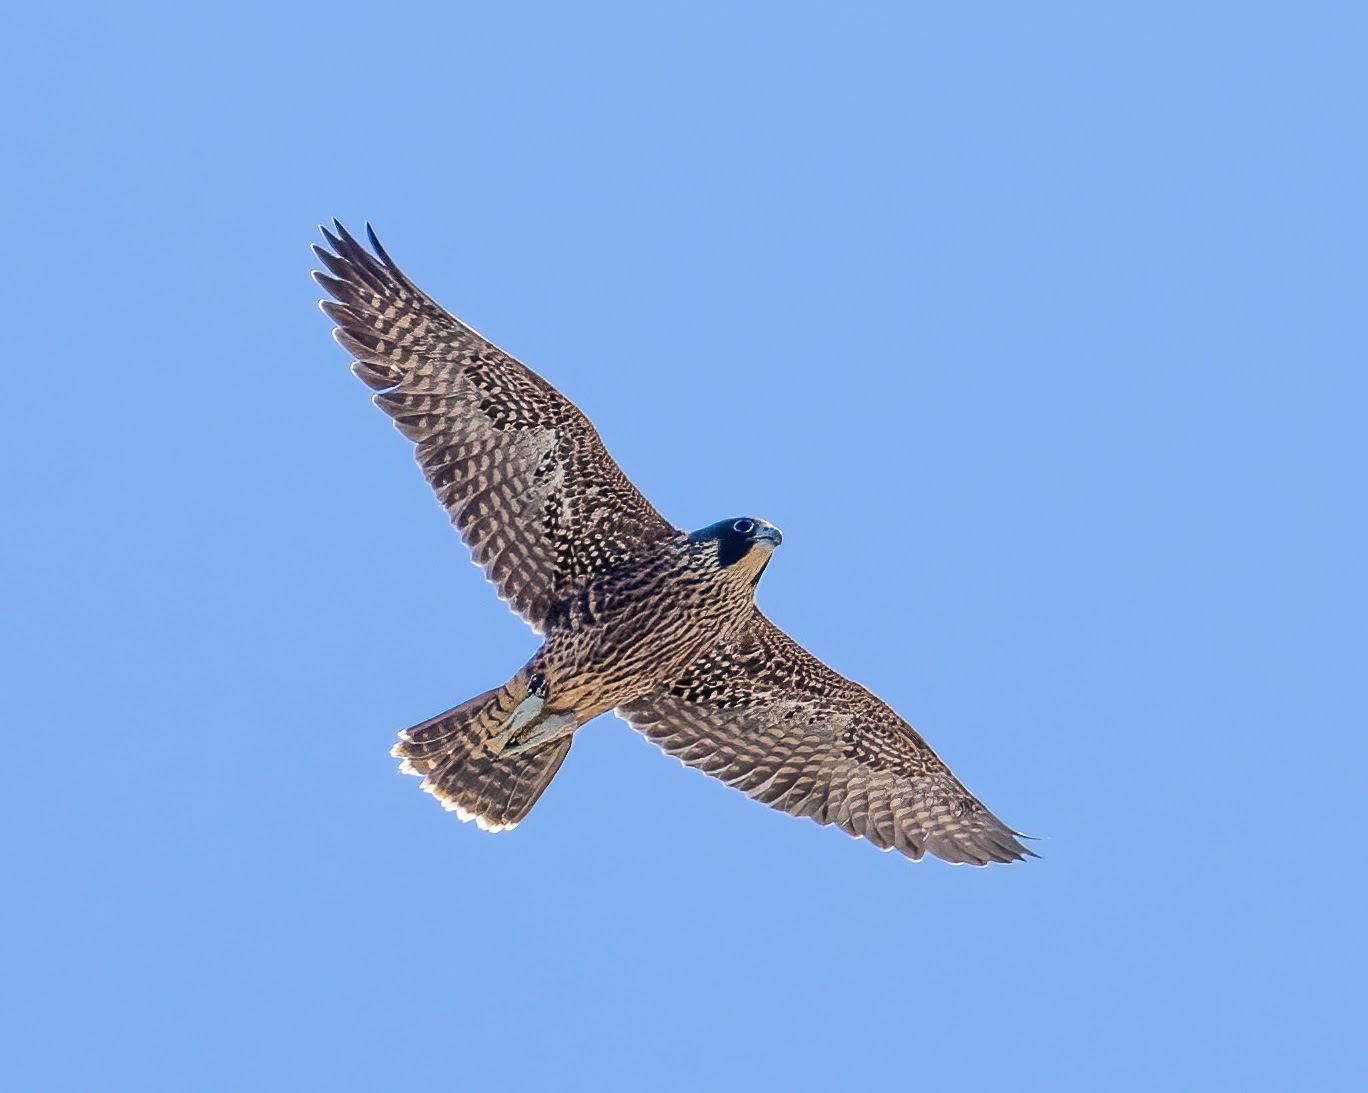 Eclipse, one of the young male falcons that hatched on the Campanile this spring, flies with wings outstretched in the blue sky over campus. This was his second flight, ever.